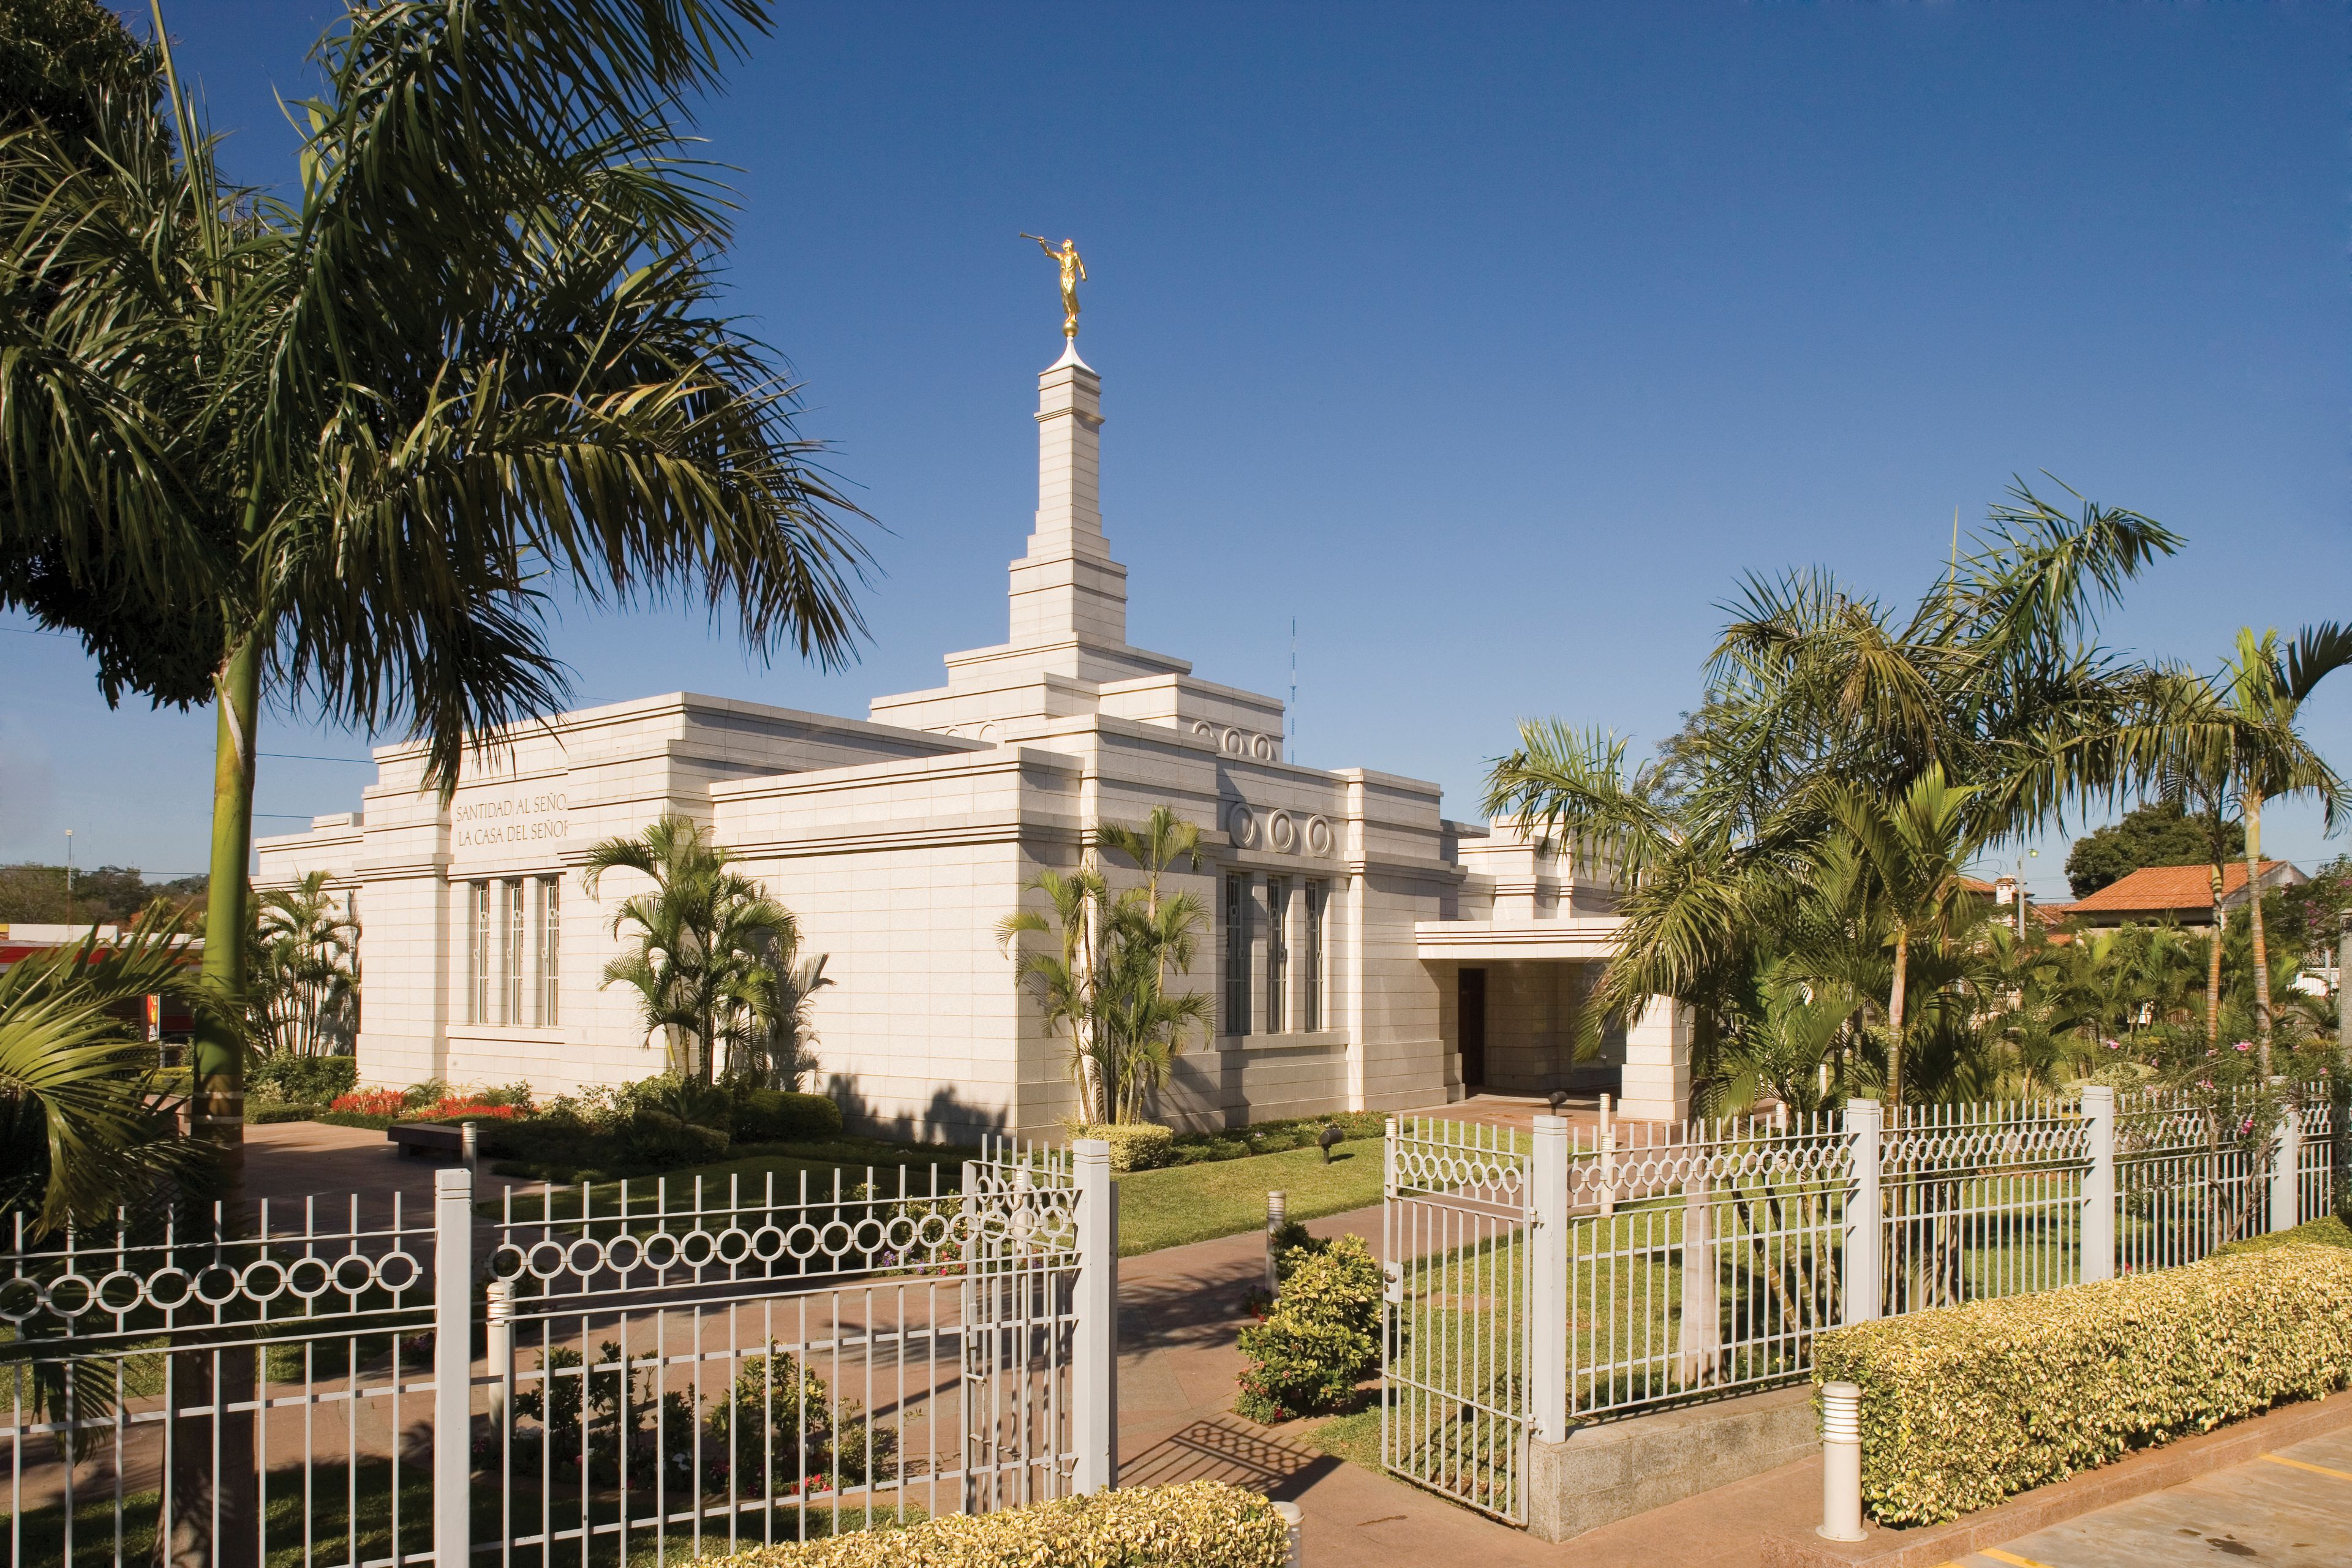 An exterior view of the Asunción Paraguay Temple and grounds at daytime.